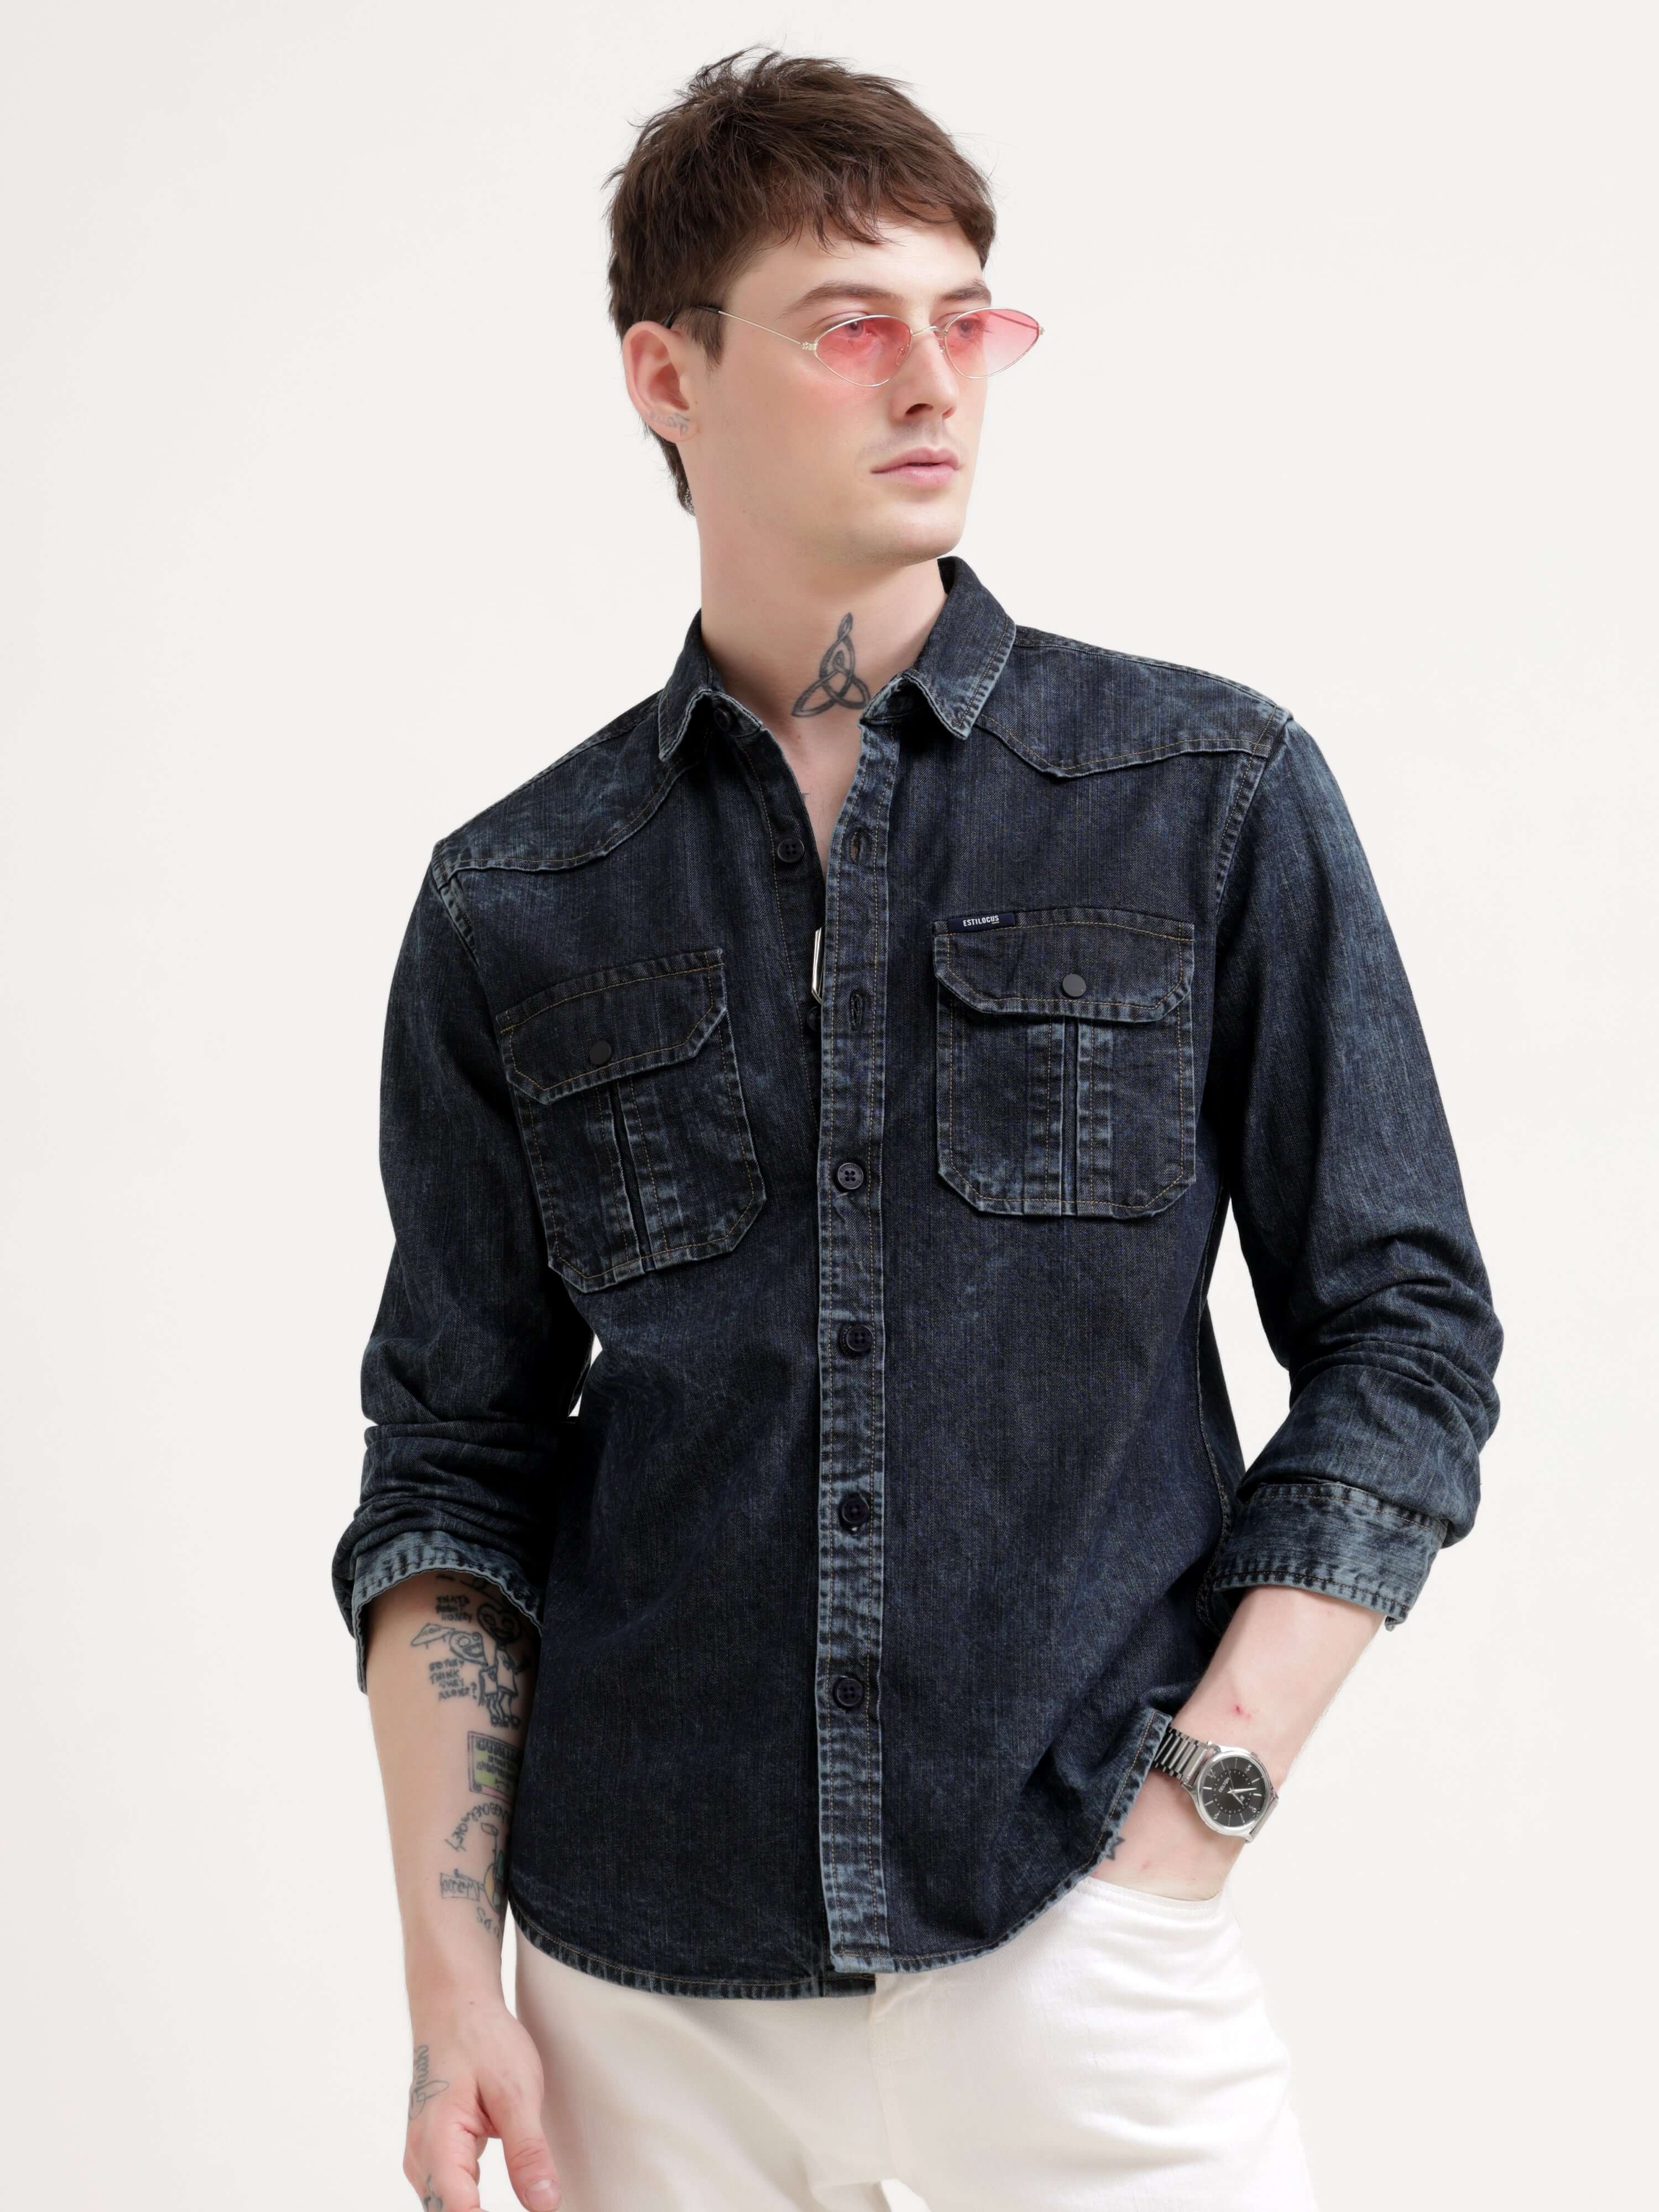 Storm indigo denim shirt - Men's Casual Wear shop online at Estilocus. Elevate your style with our Storm Indigo Denim Shirt, perfect for any season. Breathable, tailored, and polished for a sophisticated look.